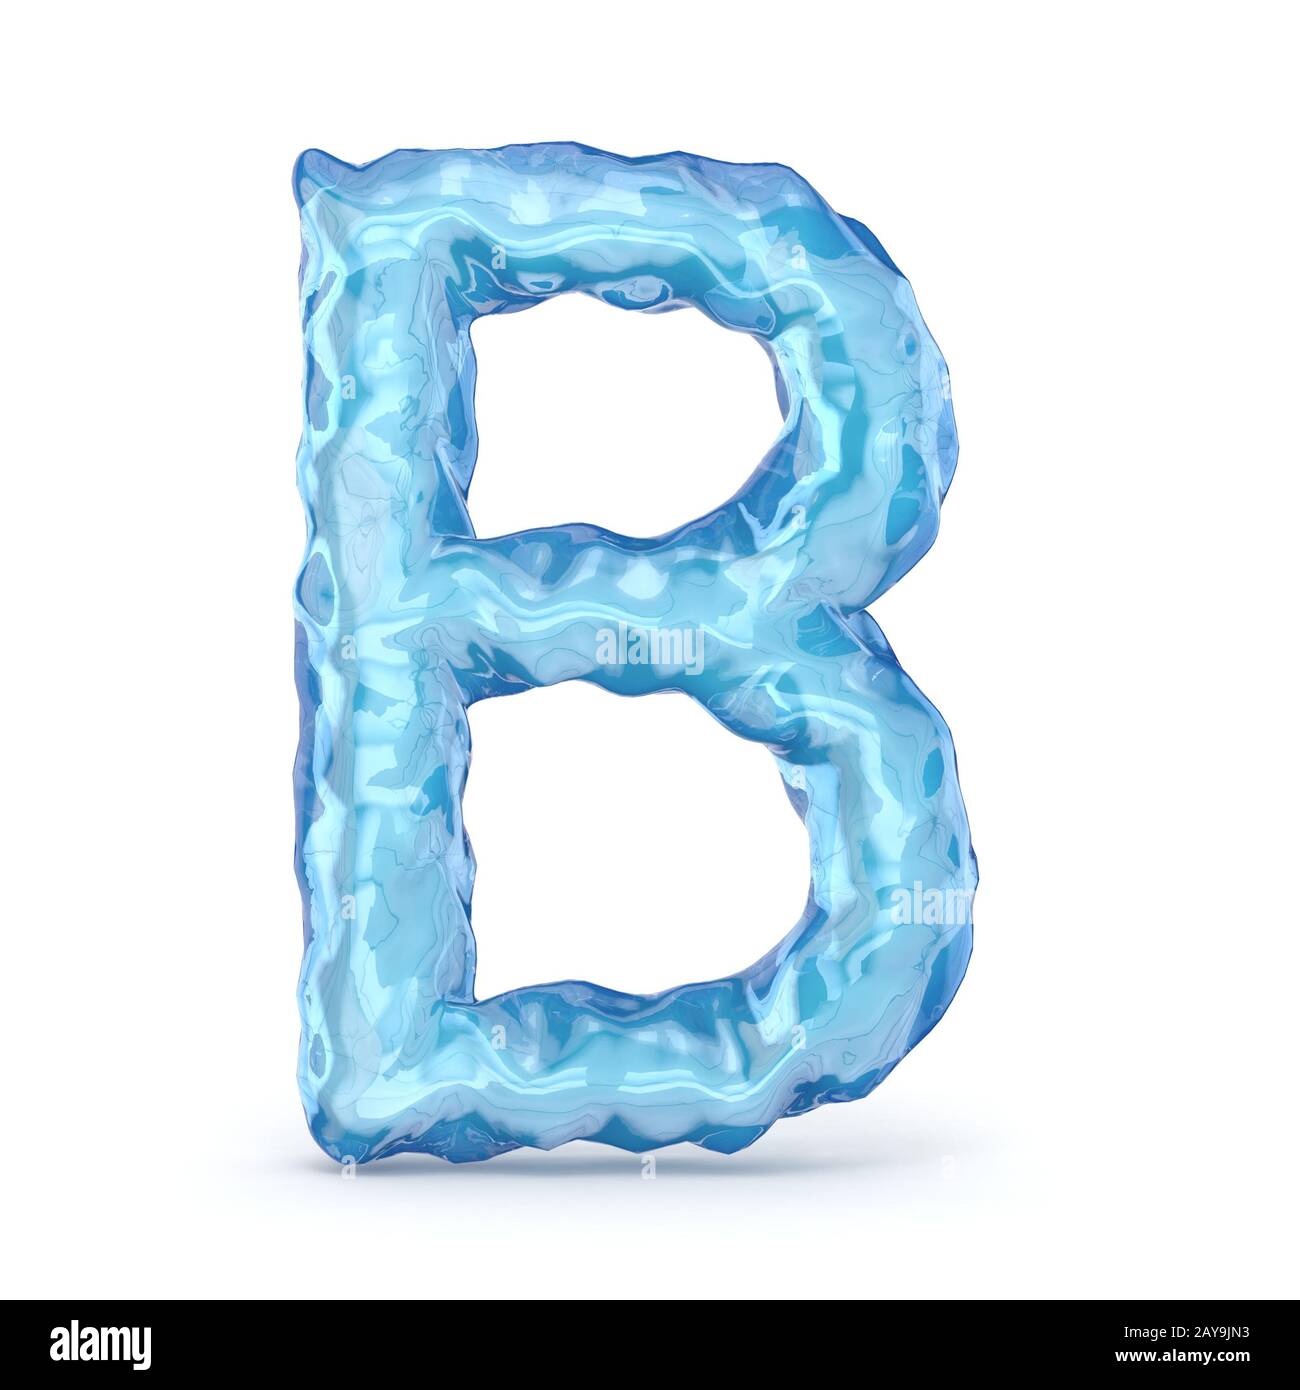 Ice font letter B 3D Stock Photo